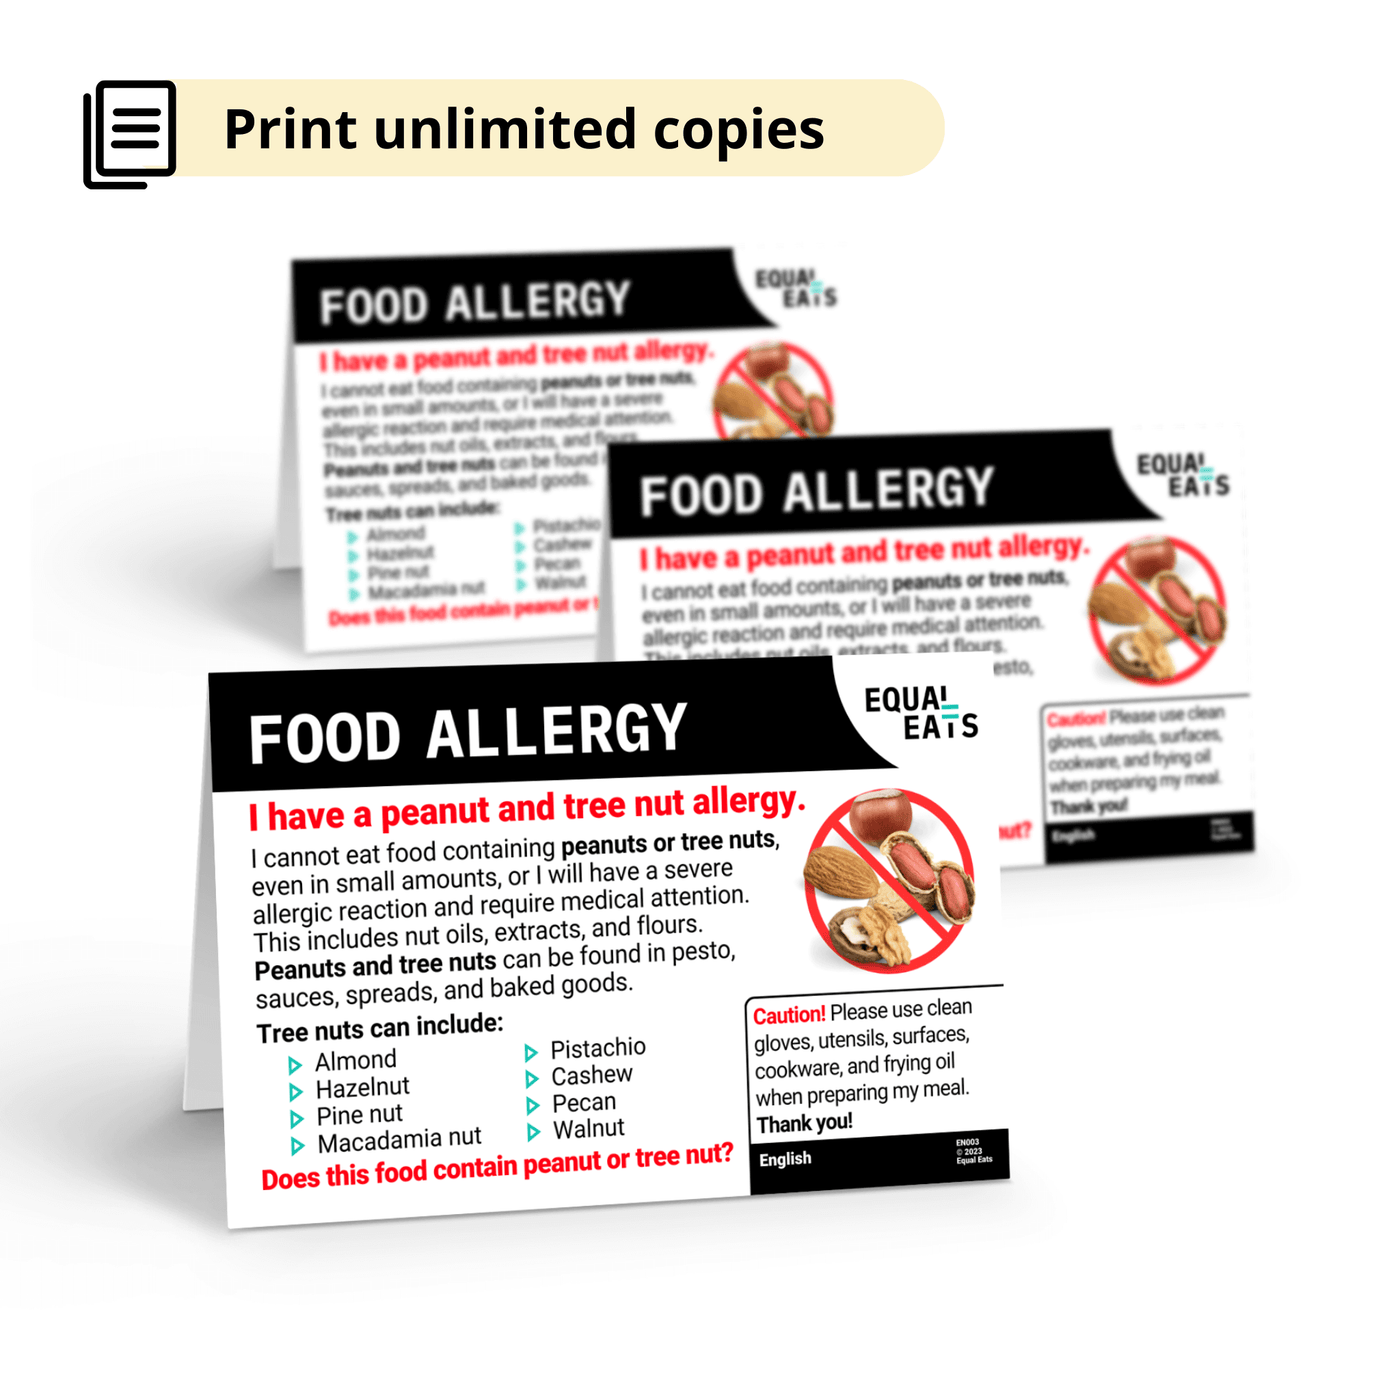 Printable Peanut and Tree Nut Allergy Card in Khmer